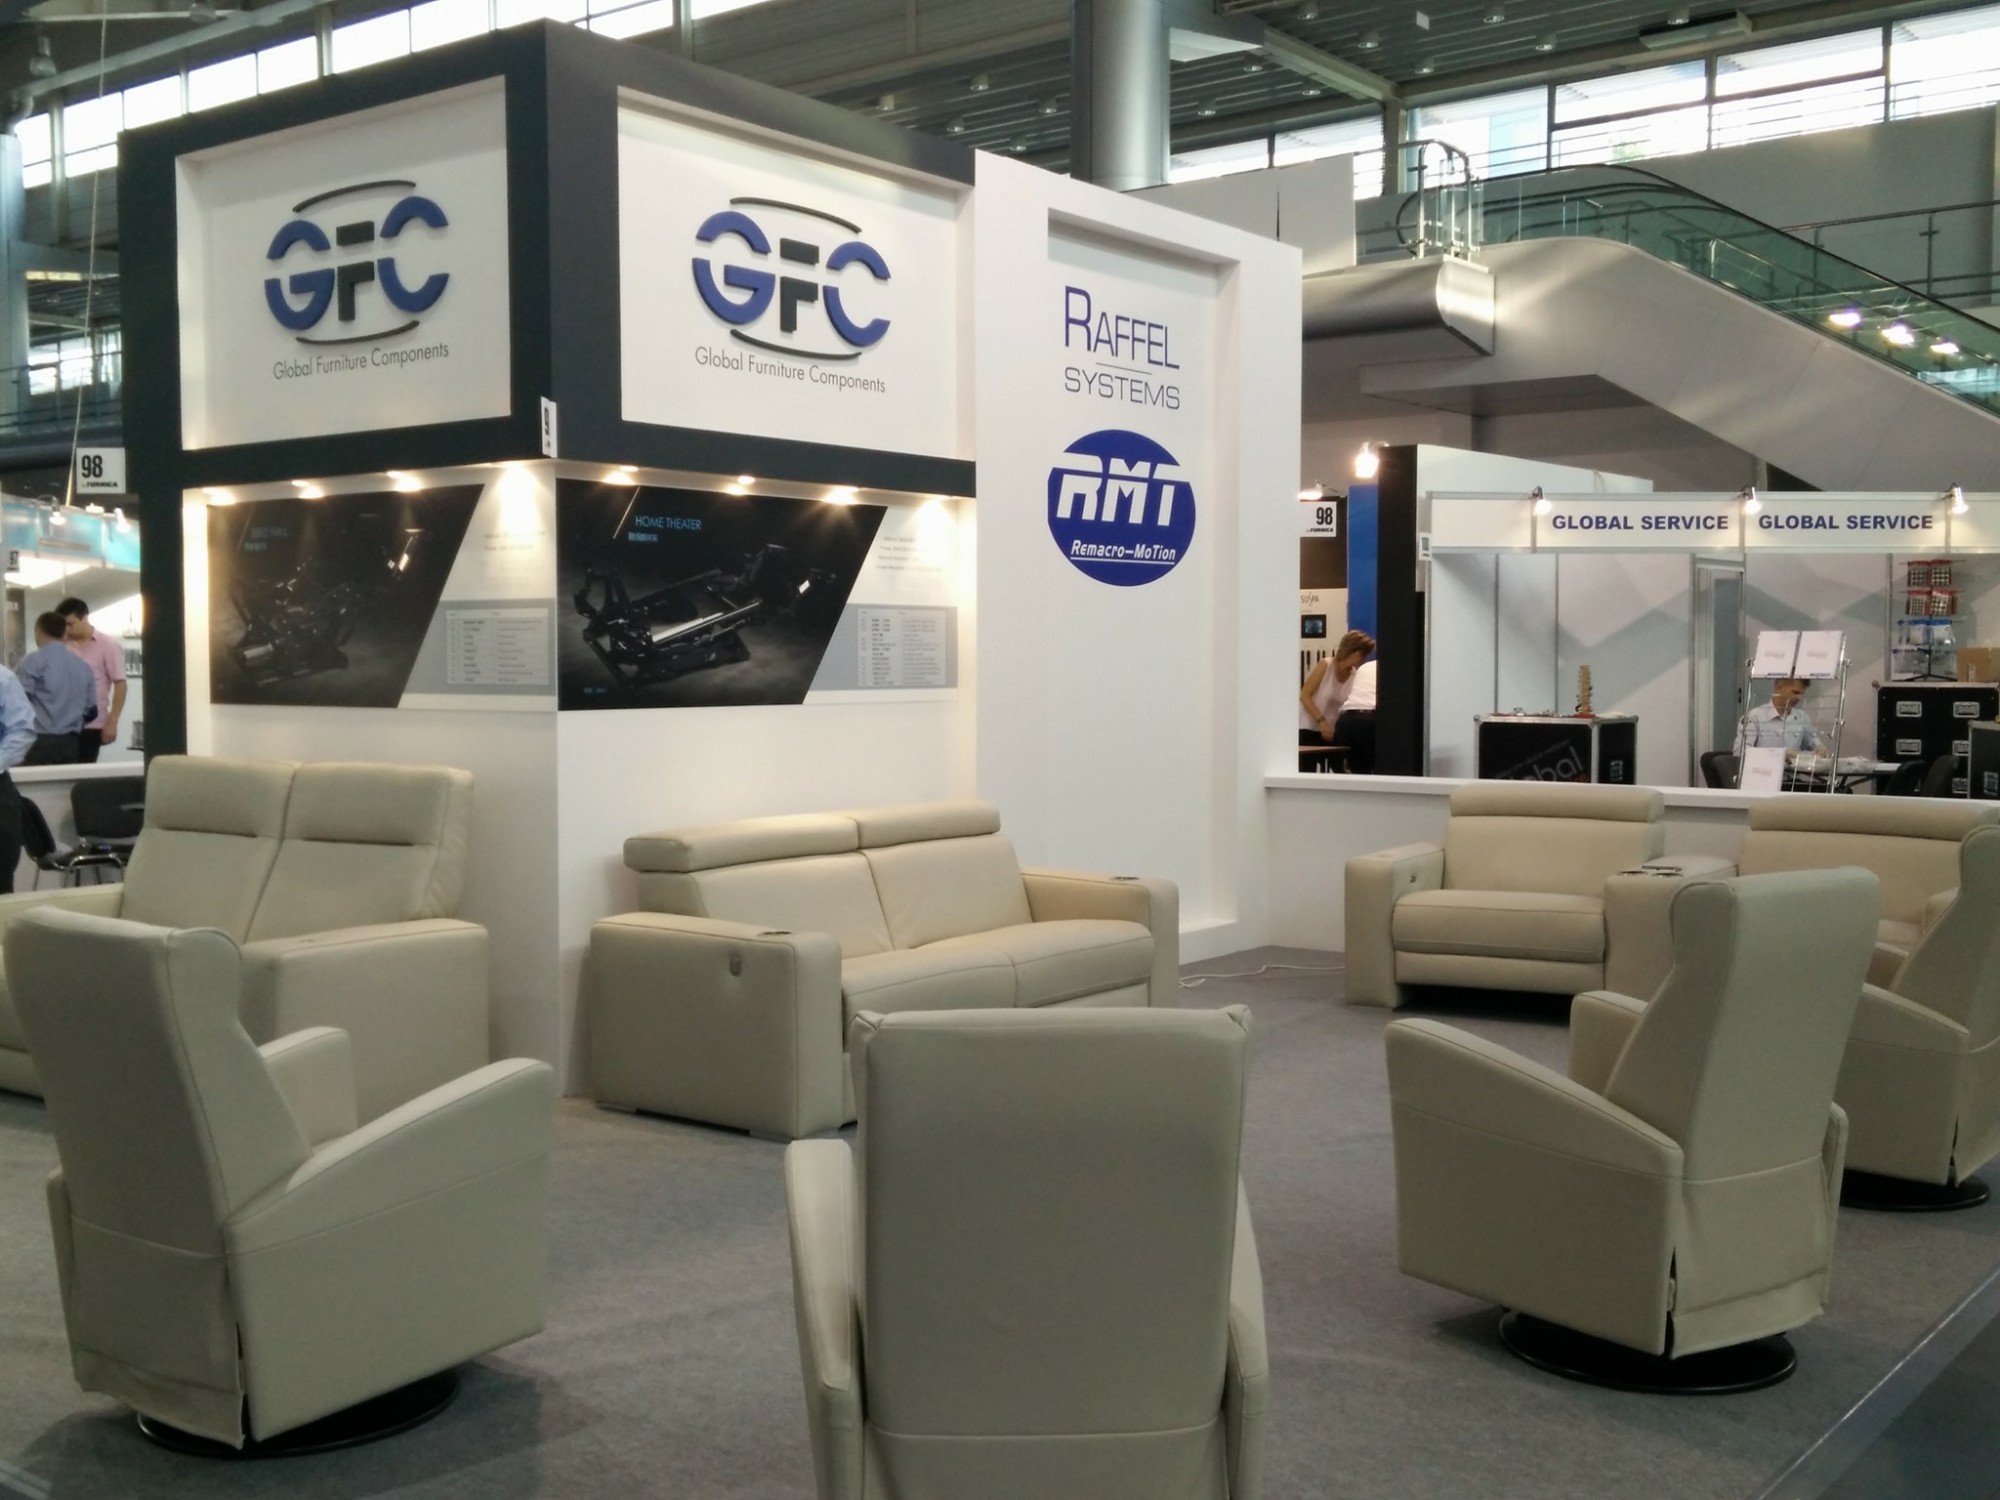 GFC completes appearance at first international trade show